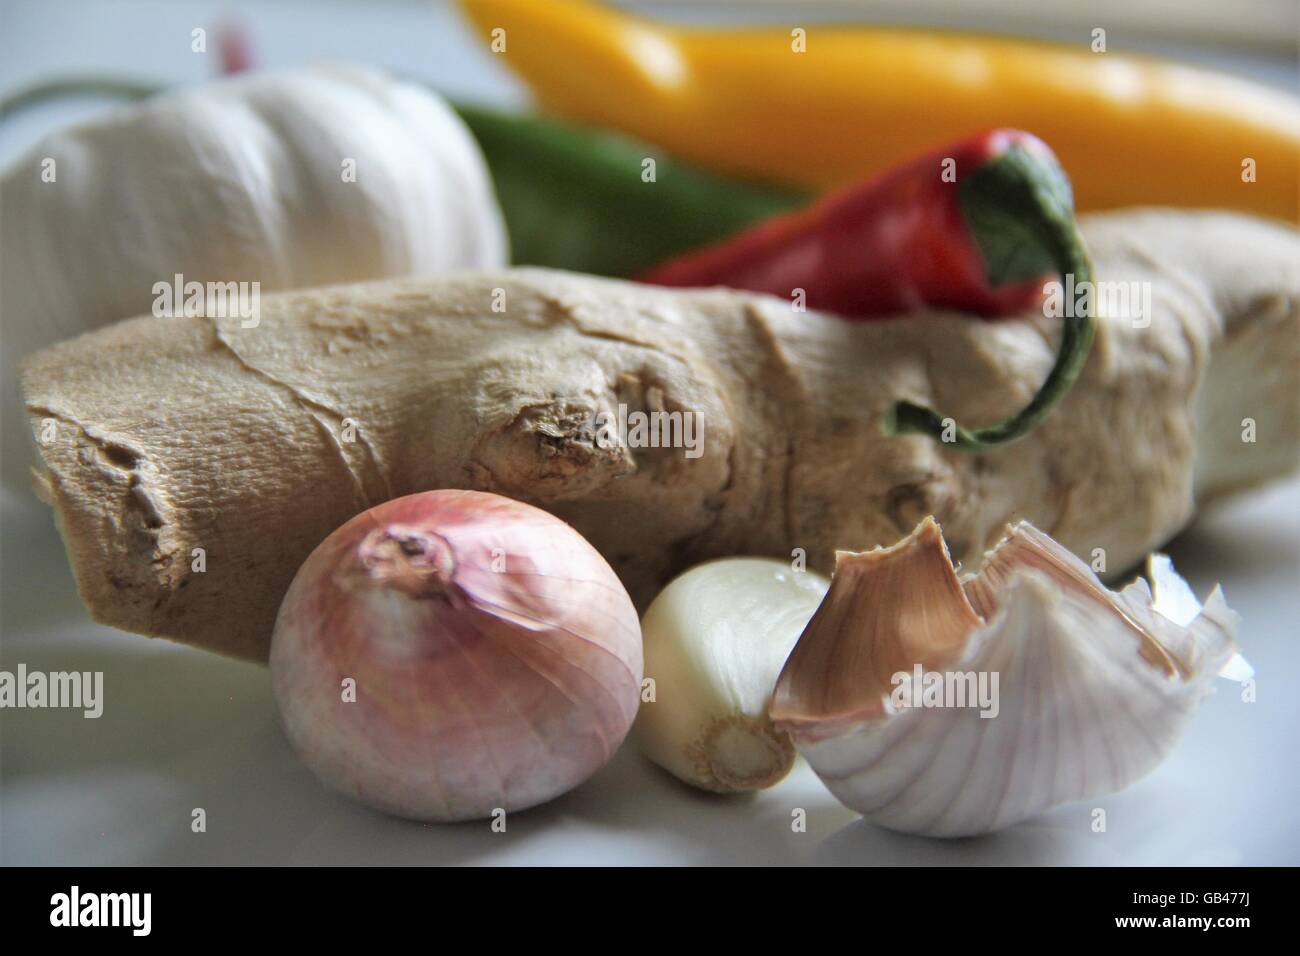 Ingredients for Asian cooking. Stock Photo